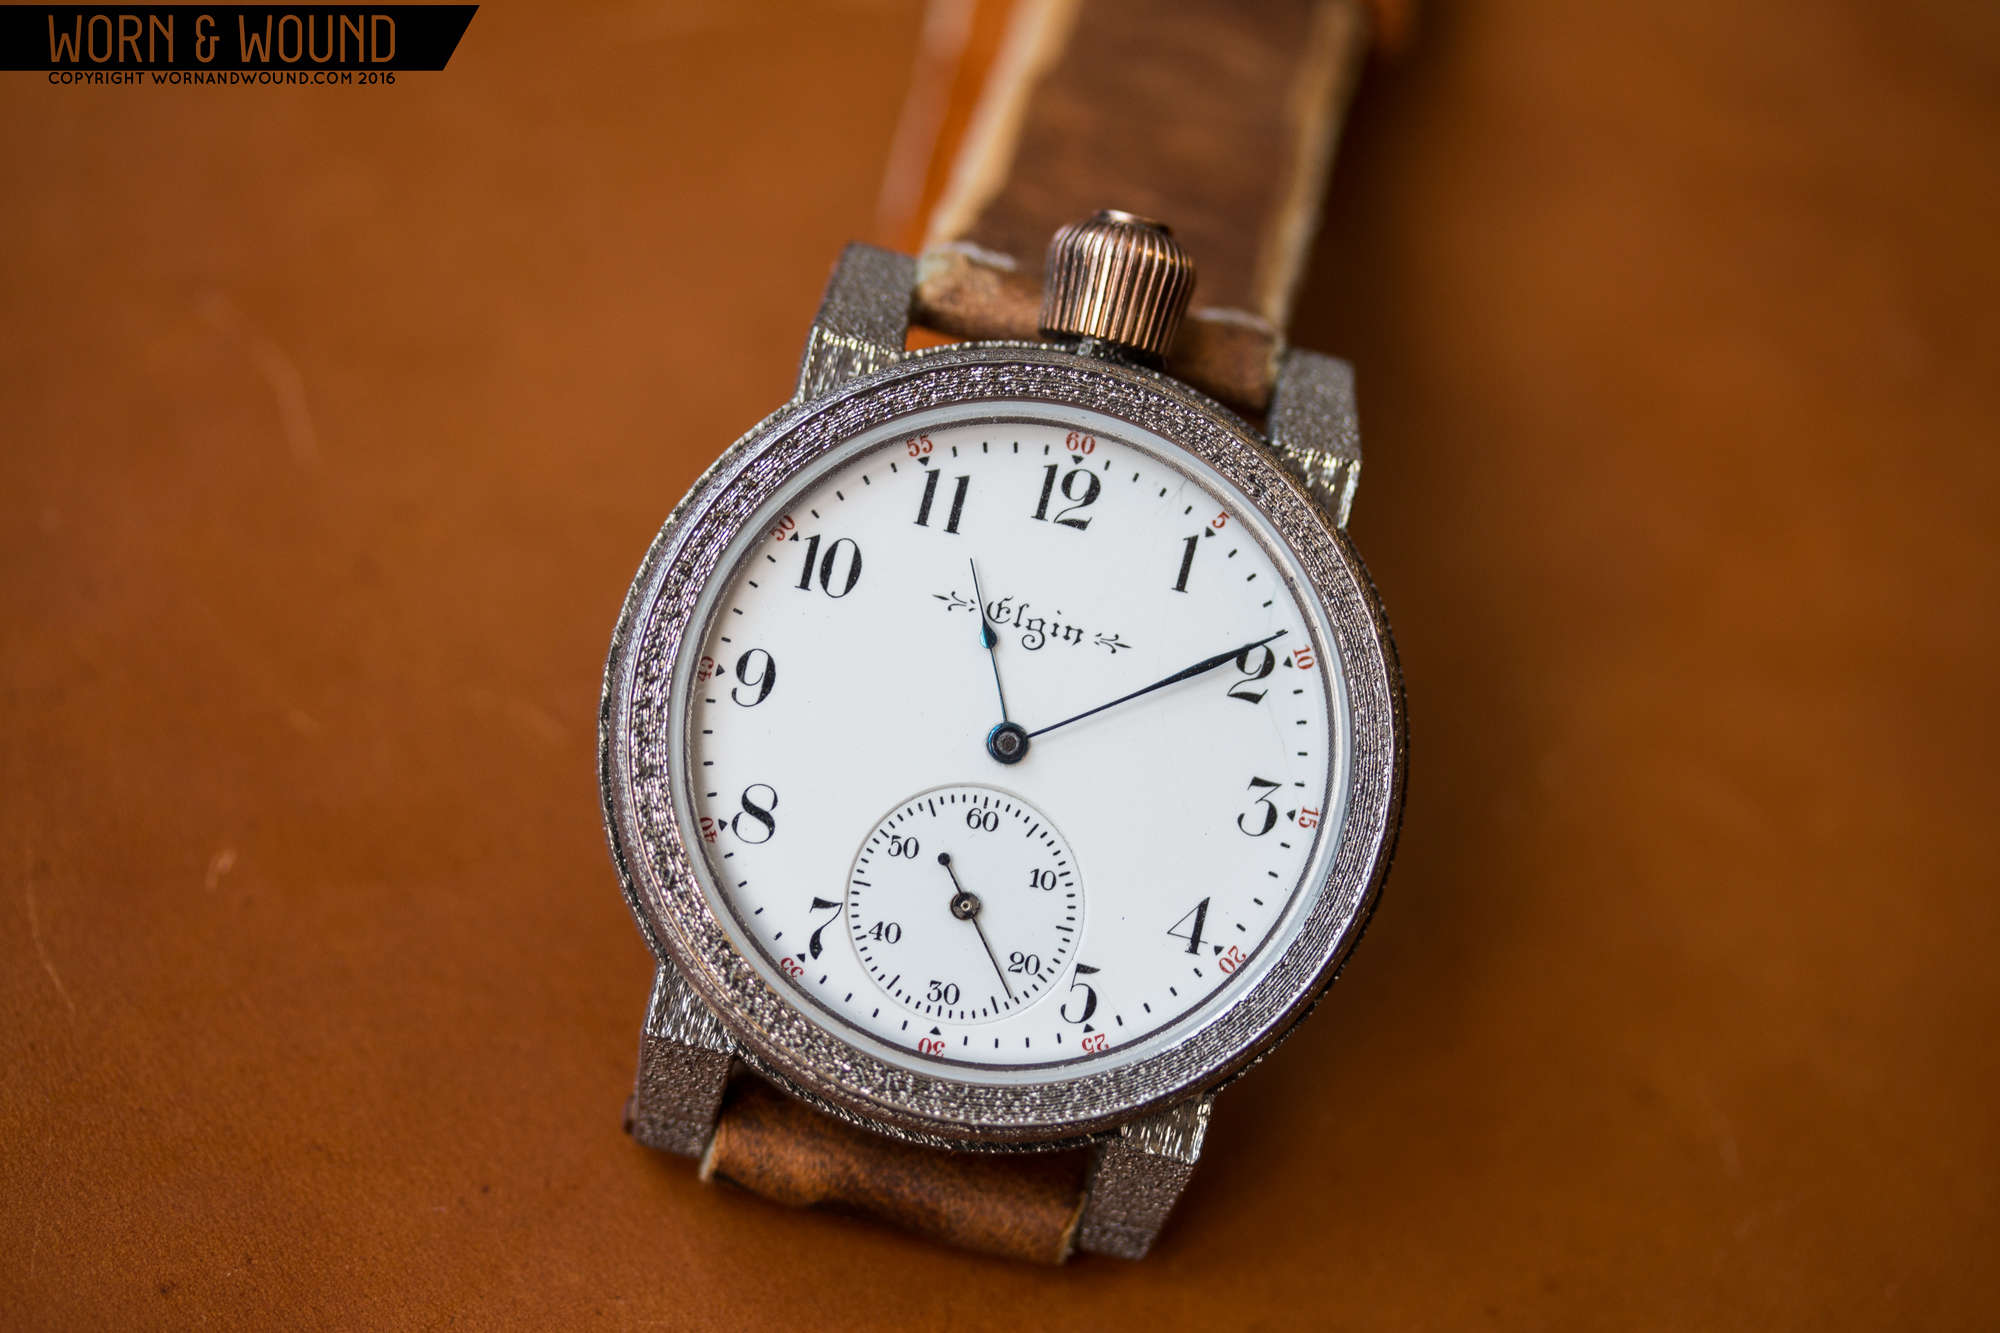 The worn&wound Podcast Ep. 12: a Conversation with R.T. Custer of Vortic Watch Company